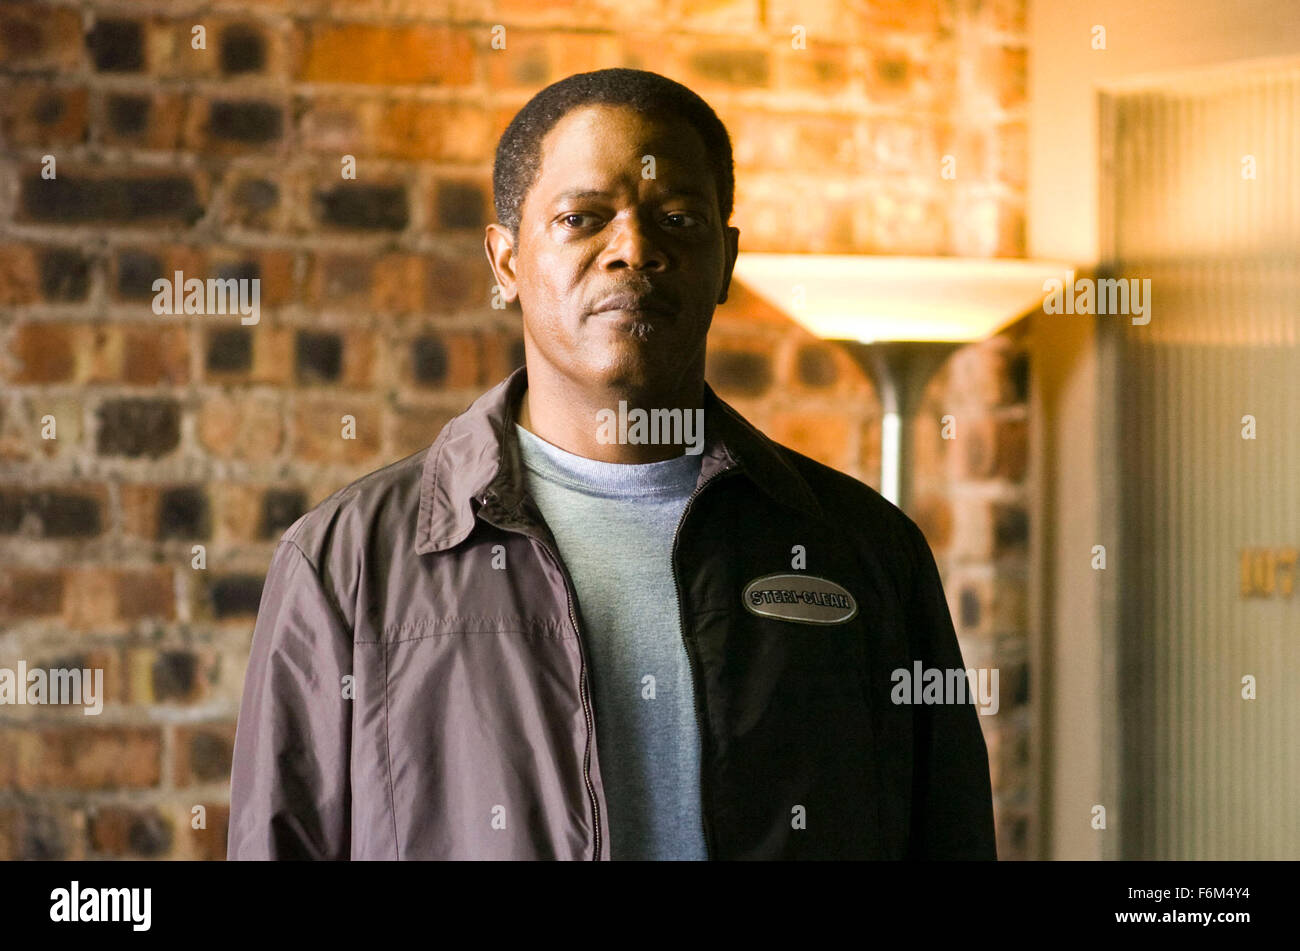 RELEASE DATE: May 27, 2008. MOVIE TITLE: Cleaner. STUDIO: Odeon. PLOT: A former cop who now earns a wage as a crime scene cleaner unknowingly participates in a cover-up at his latest job. PICTURED: SAMUEL L. JACKSON as Tom Carver. Stock Photo